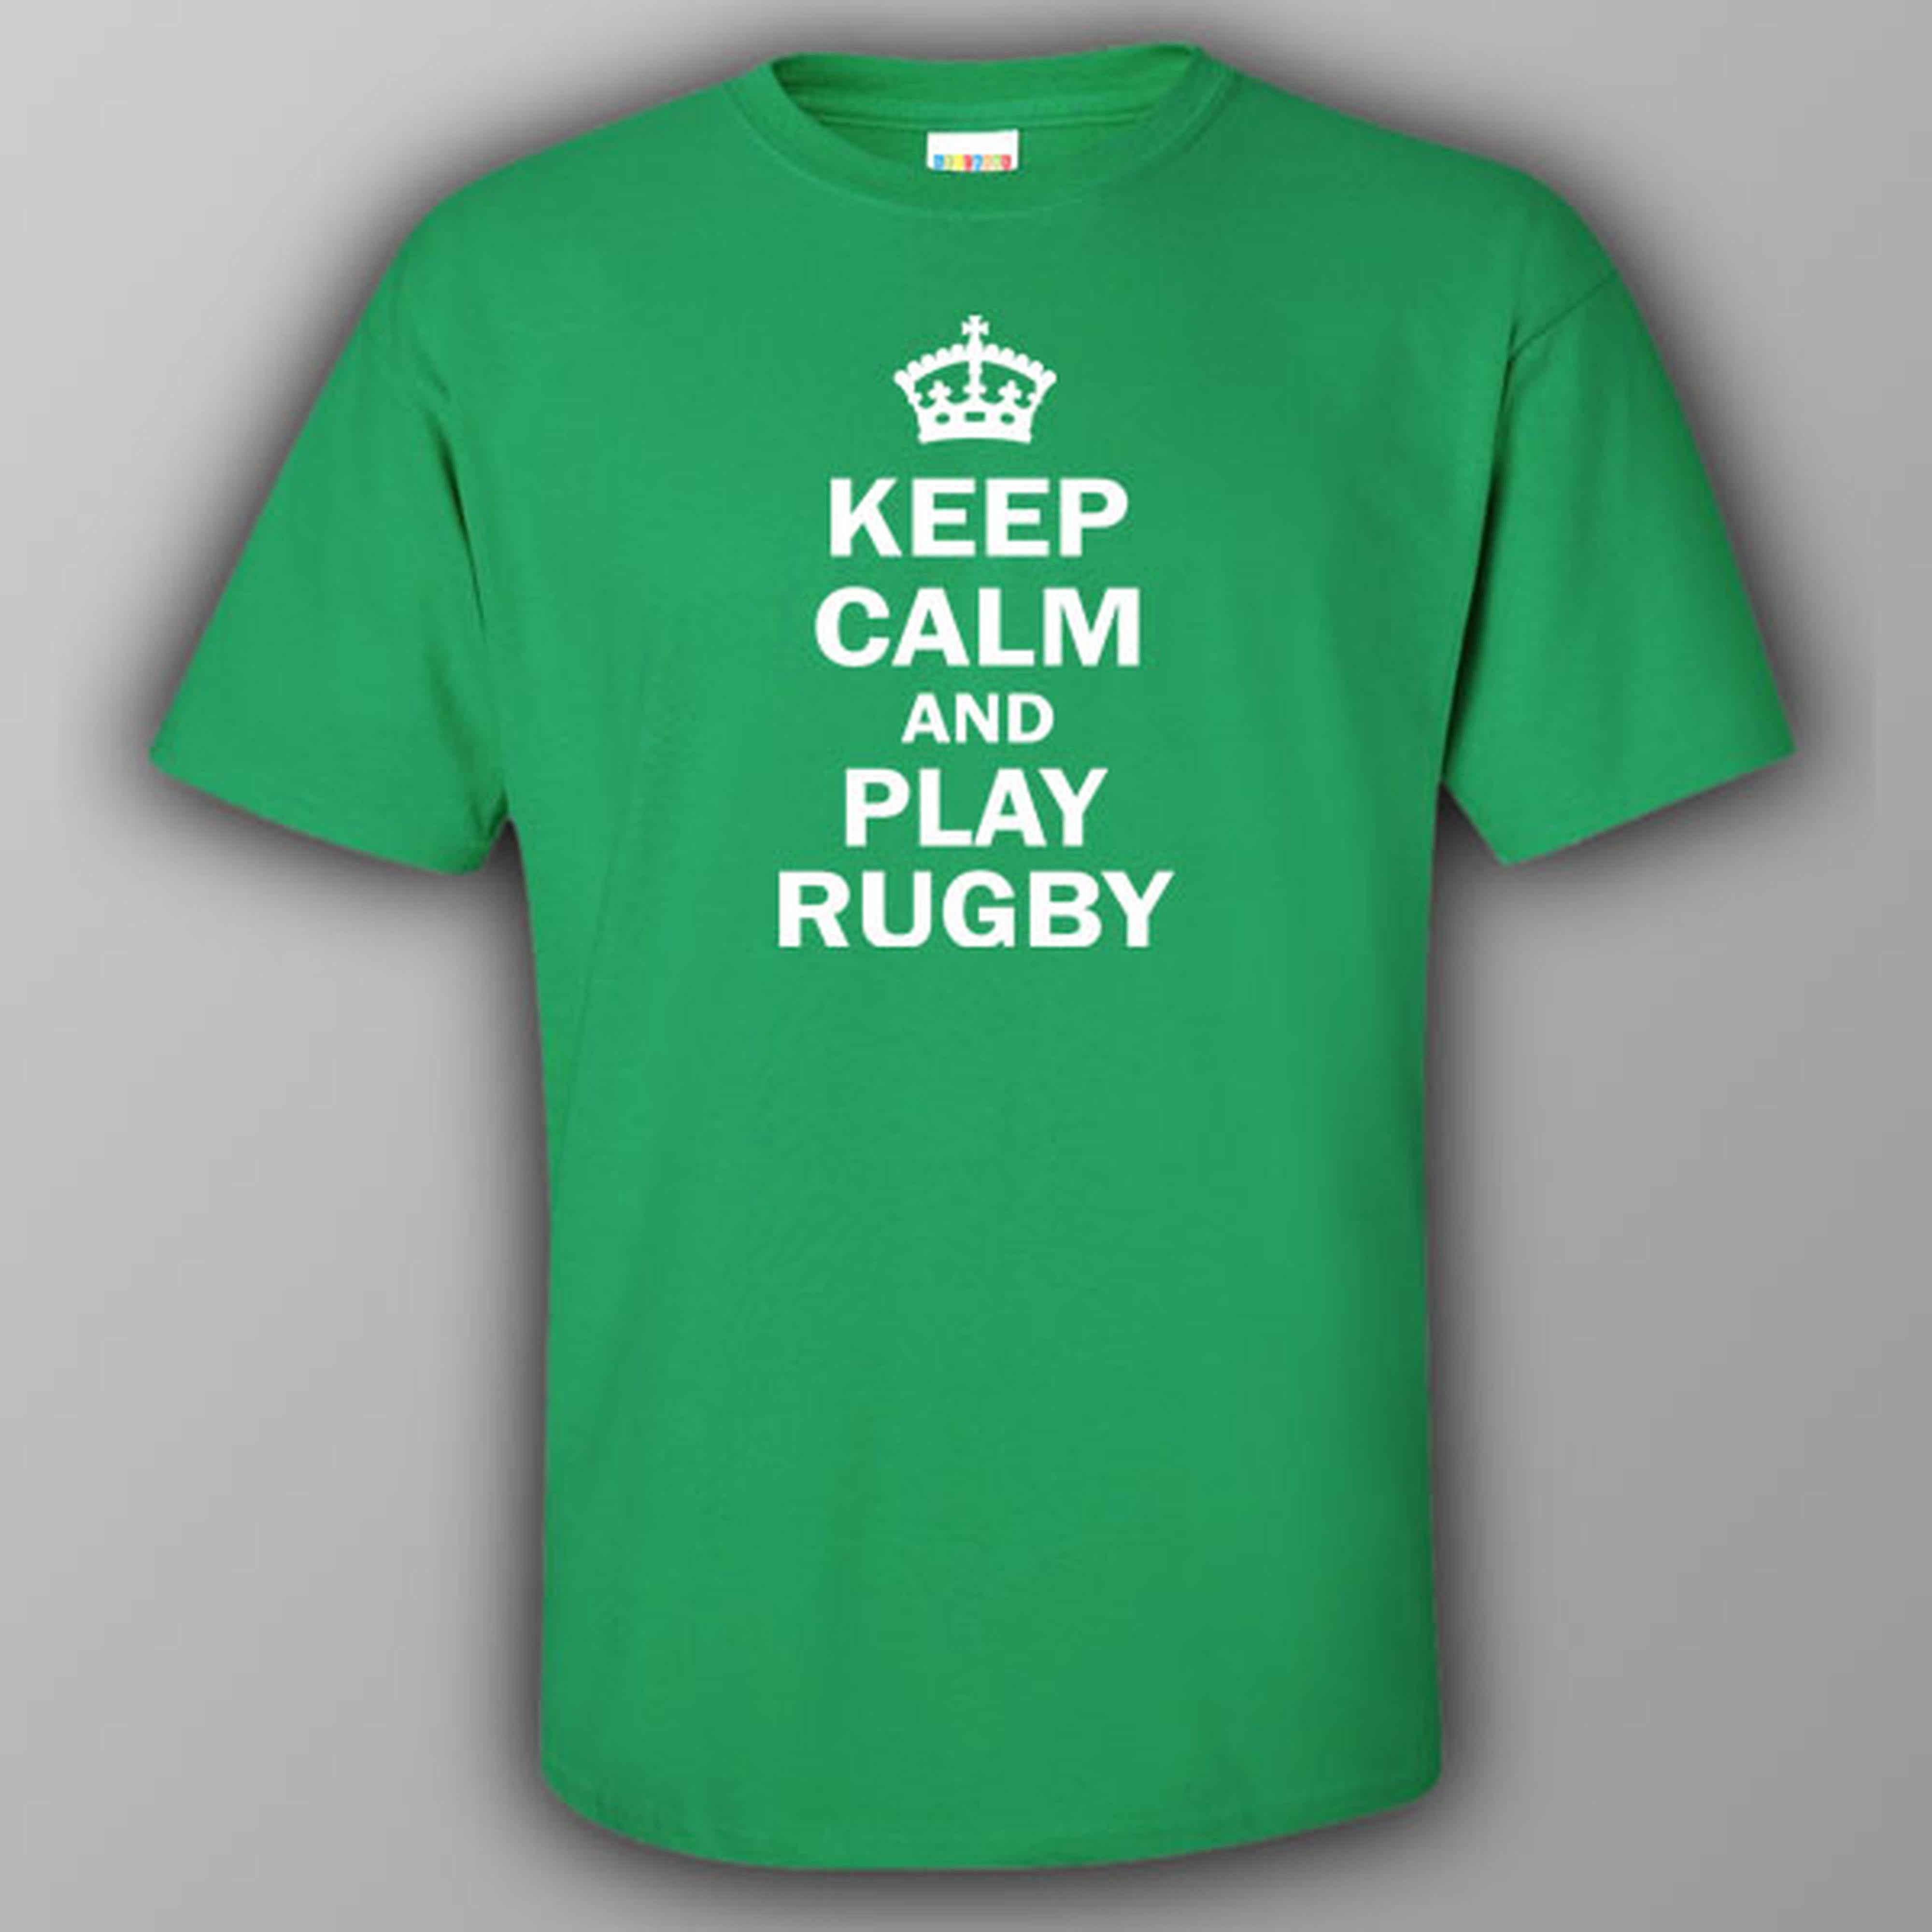 Keep calm and play rugby - T-shirt